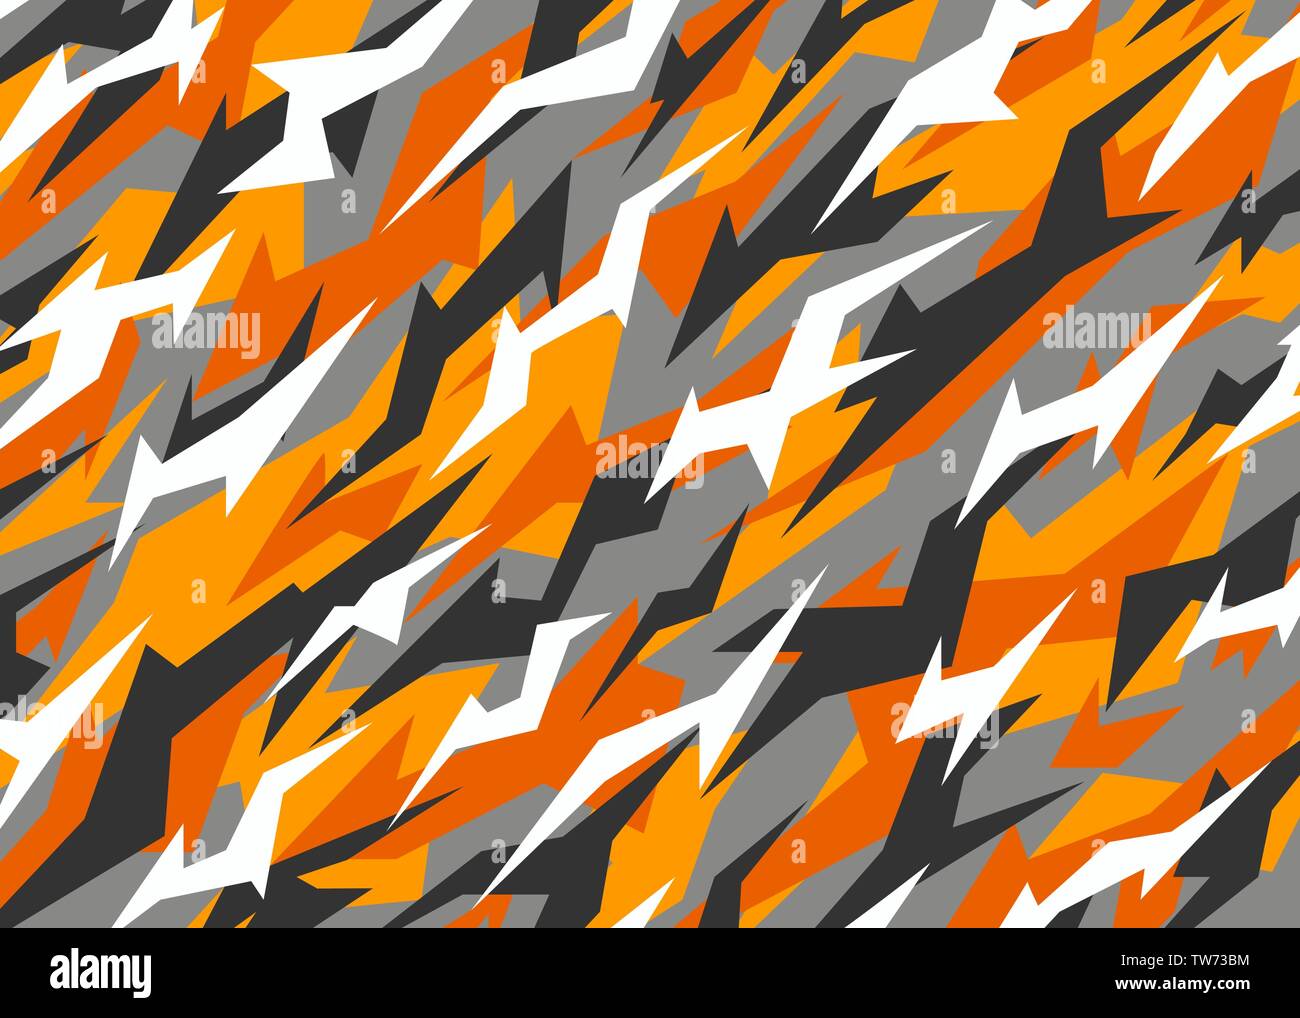 Orange camouflage pattern. Modern abstract camo Vector background illustration for web, banner, backdrop, graphic or surface design use Stock Vector